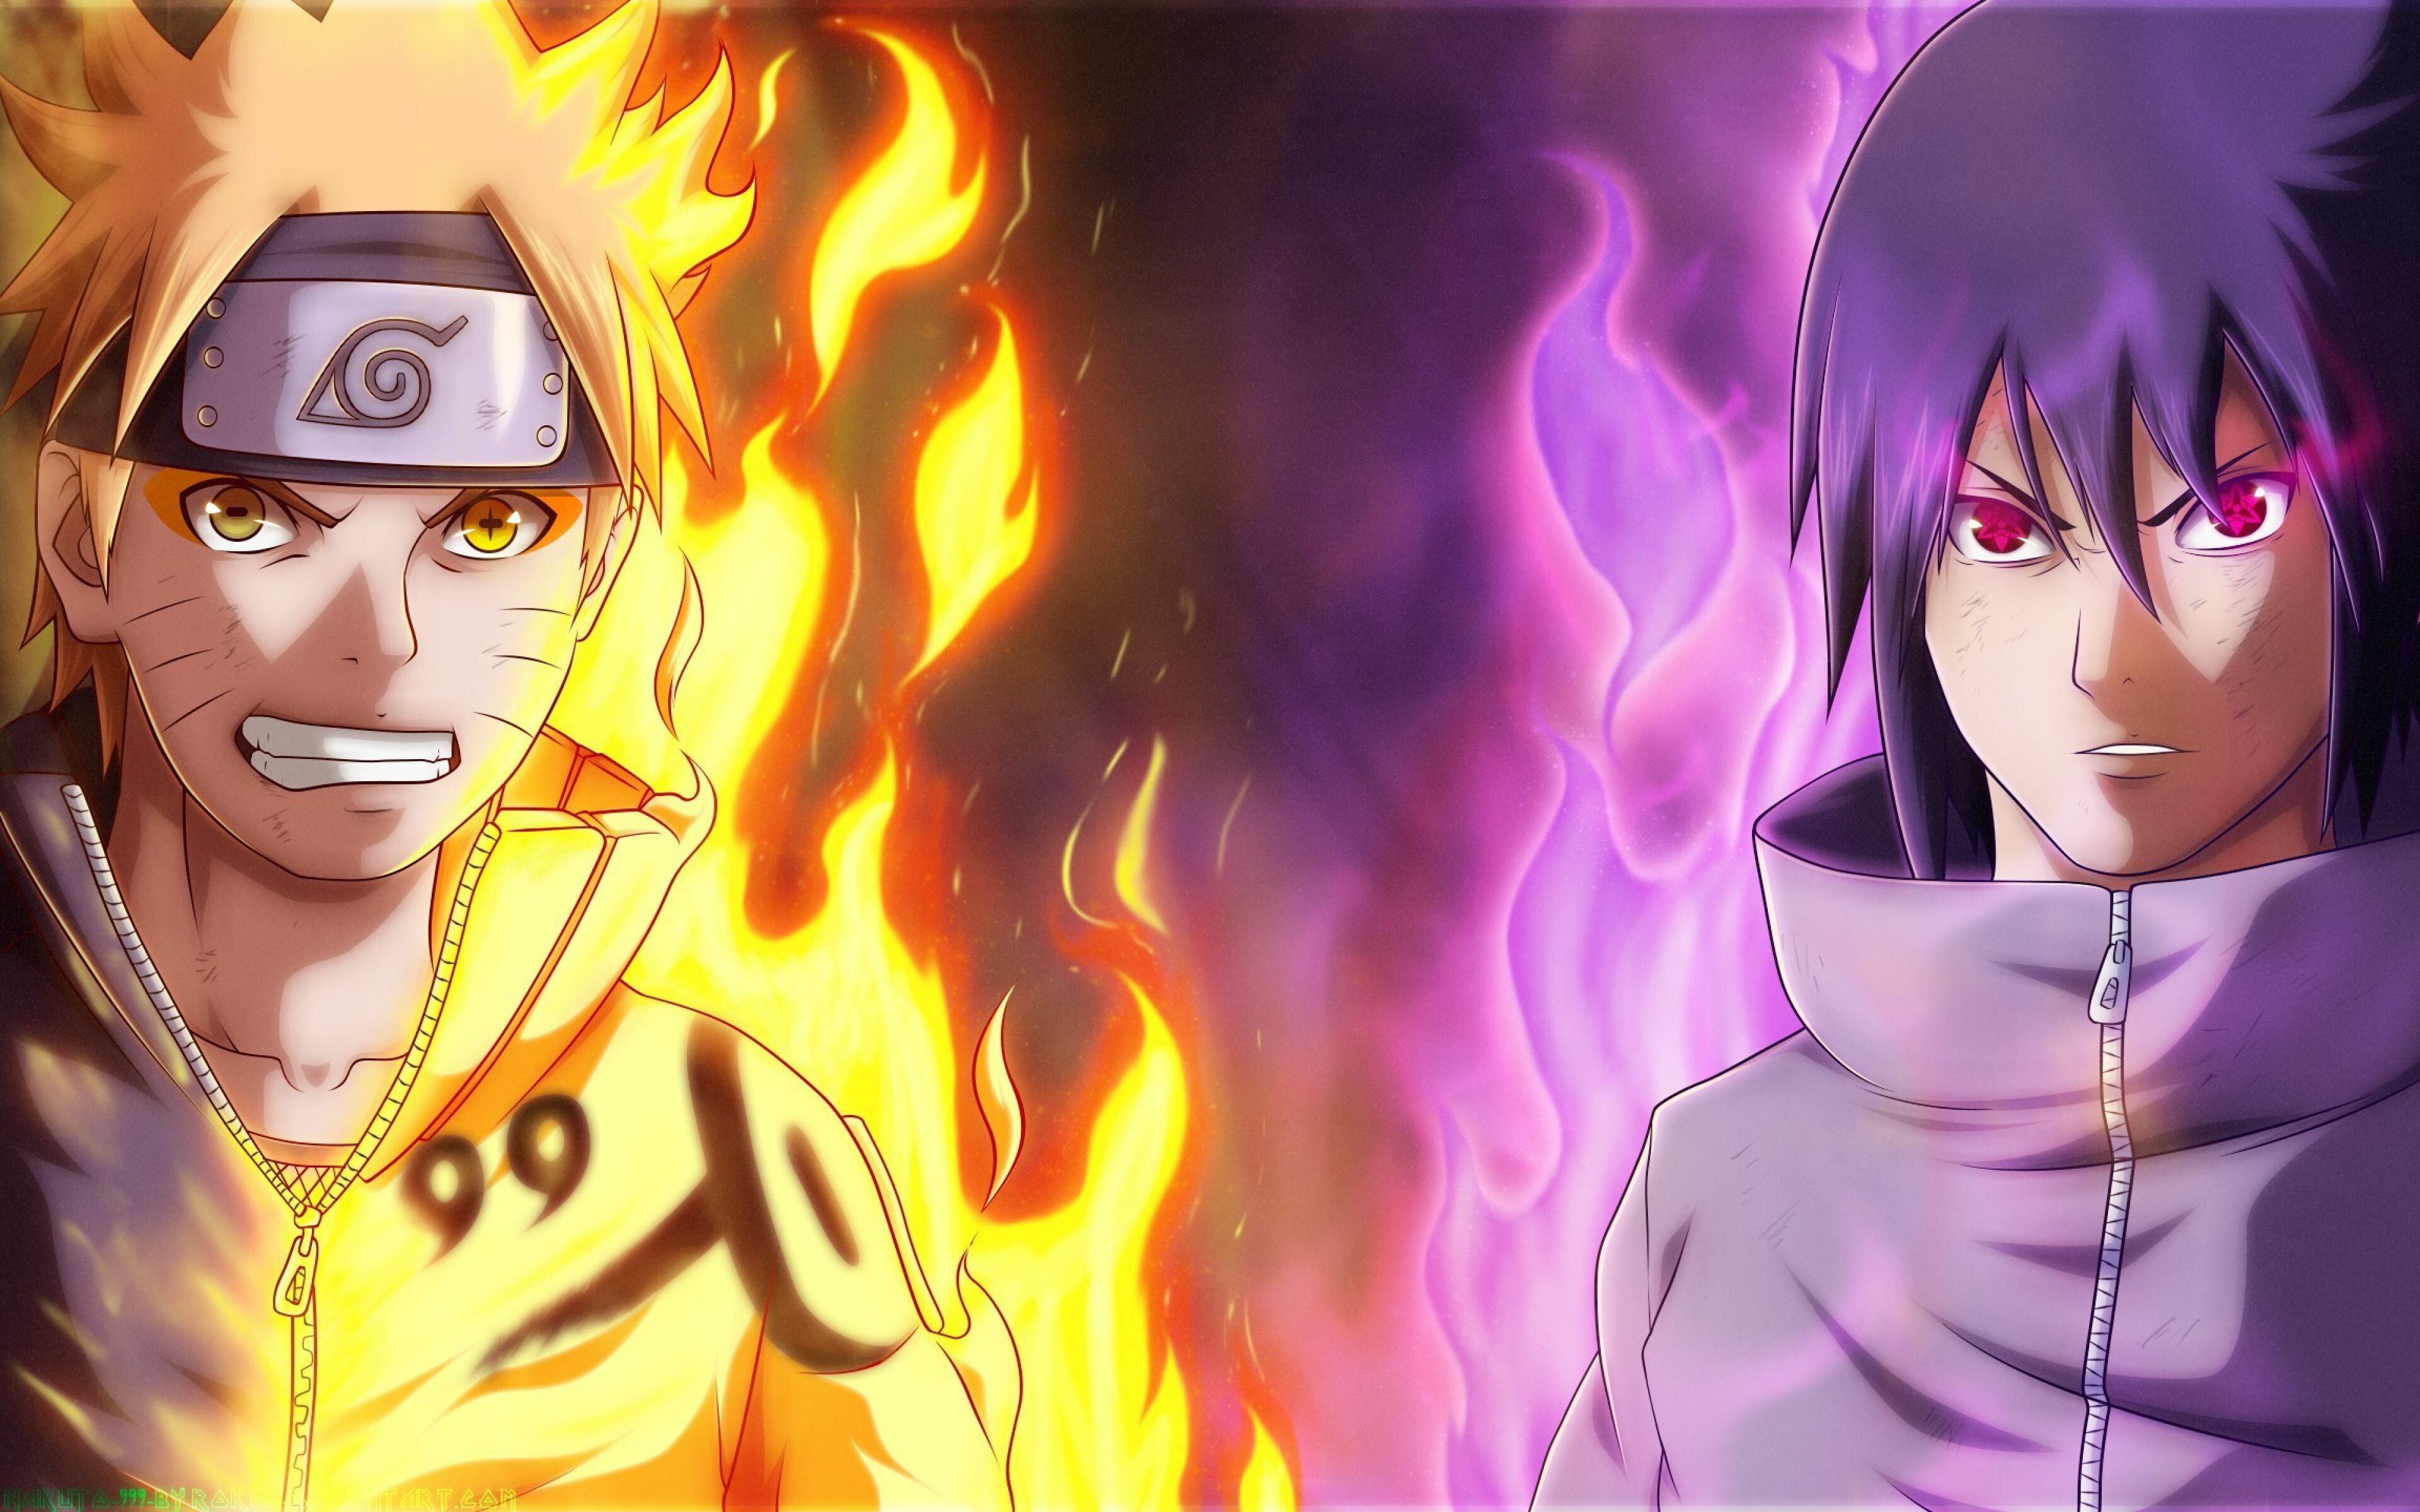 4K Naruto Wallpaper: HD, 4K, 5K for PC and Mobile. Download free image for iPhone, Android